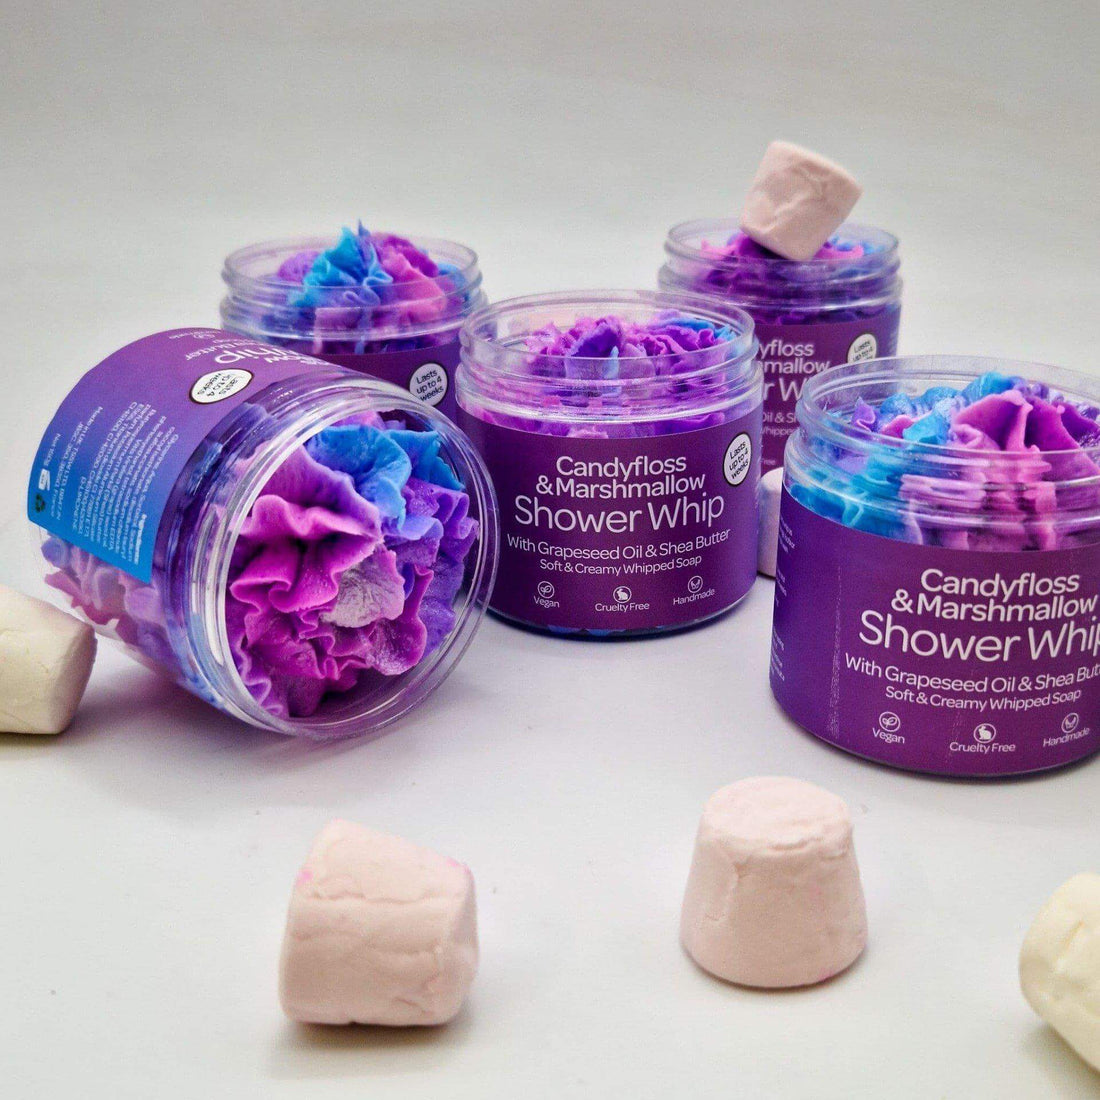 Candyfloss and Marshmallow Shower Whipped Soap